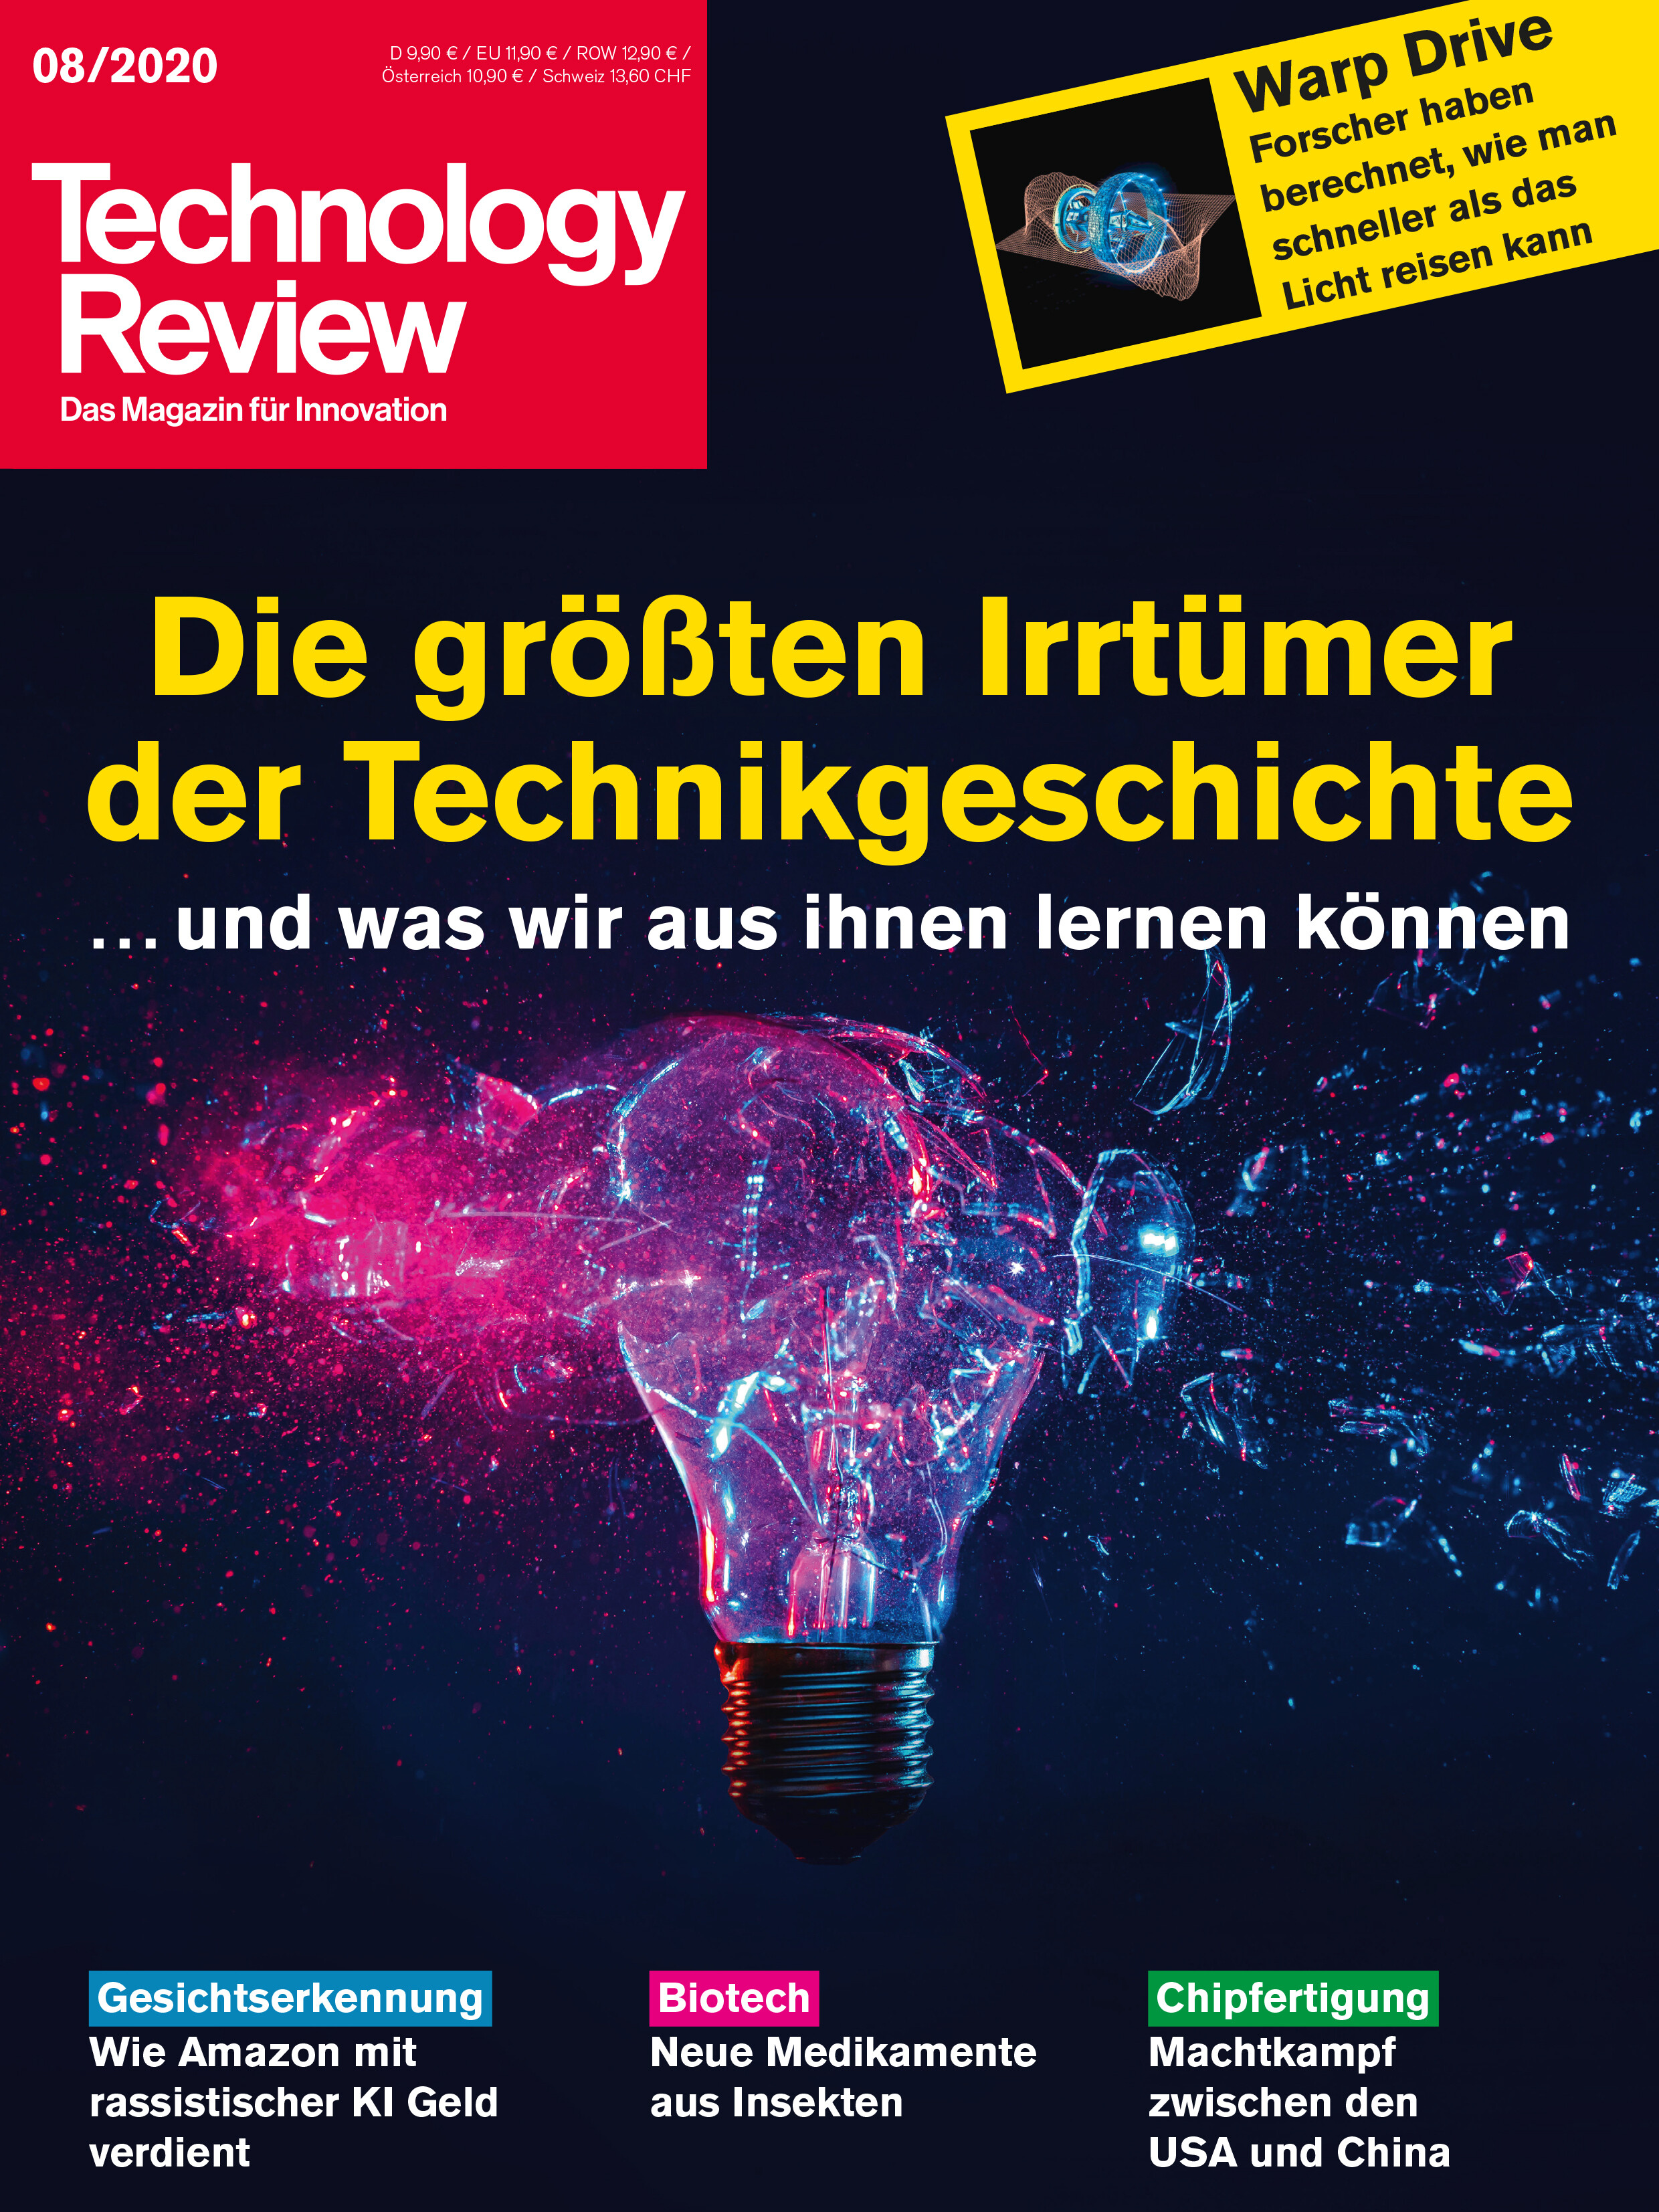 Technology Review 08/2020